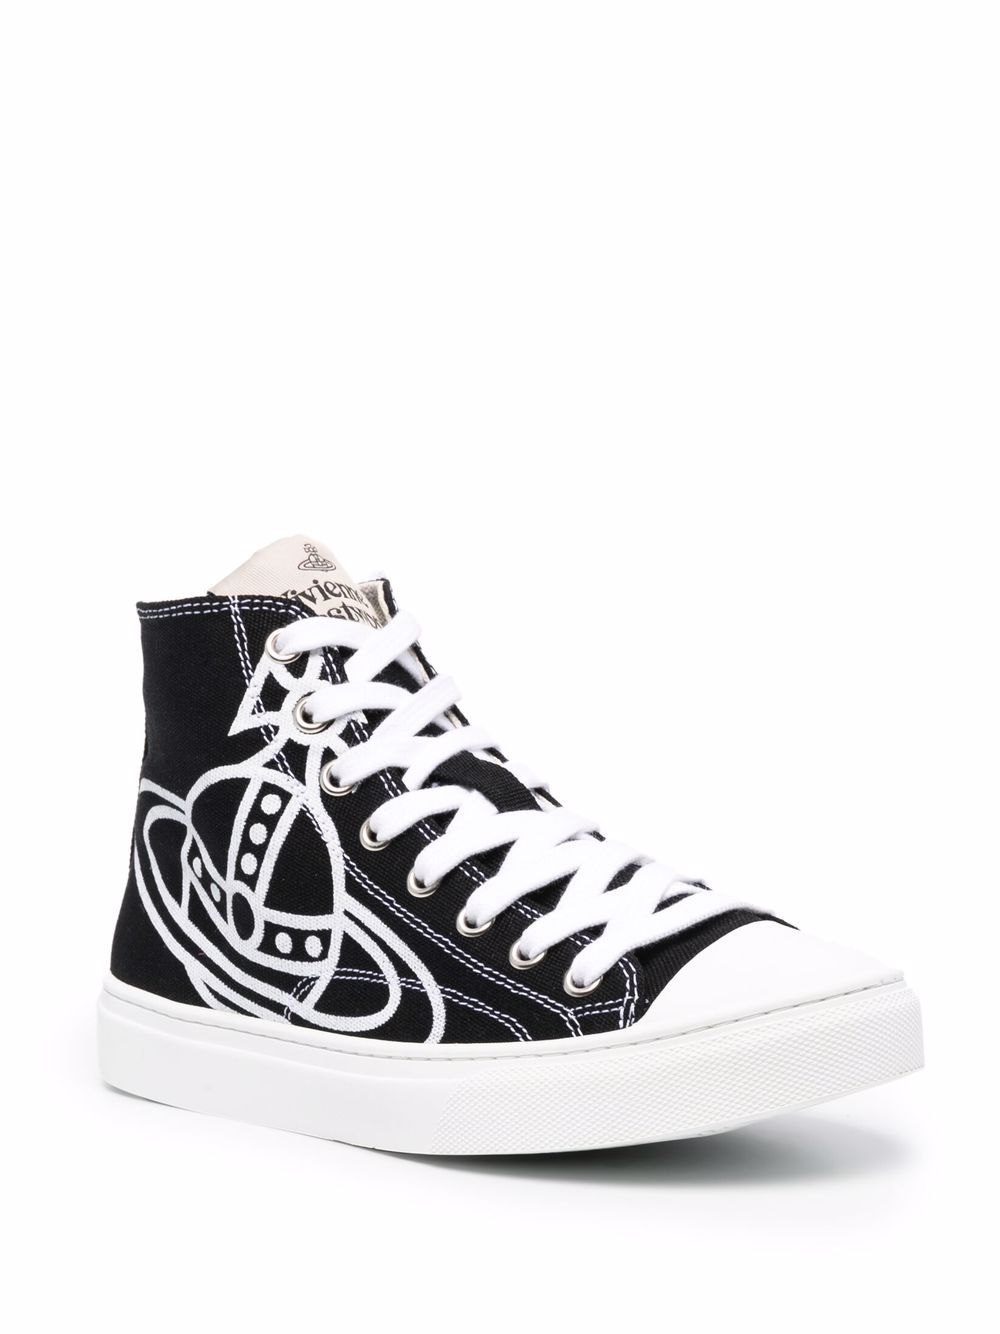 Image 2 of Vivienne Westwood high-top baseball boots